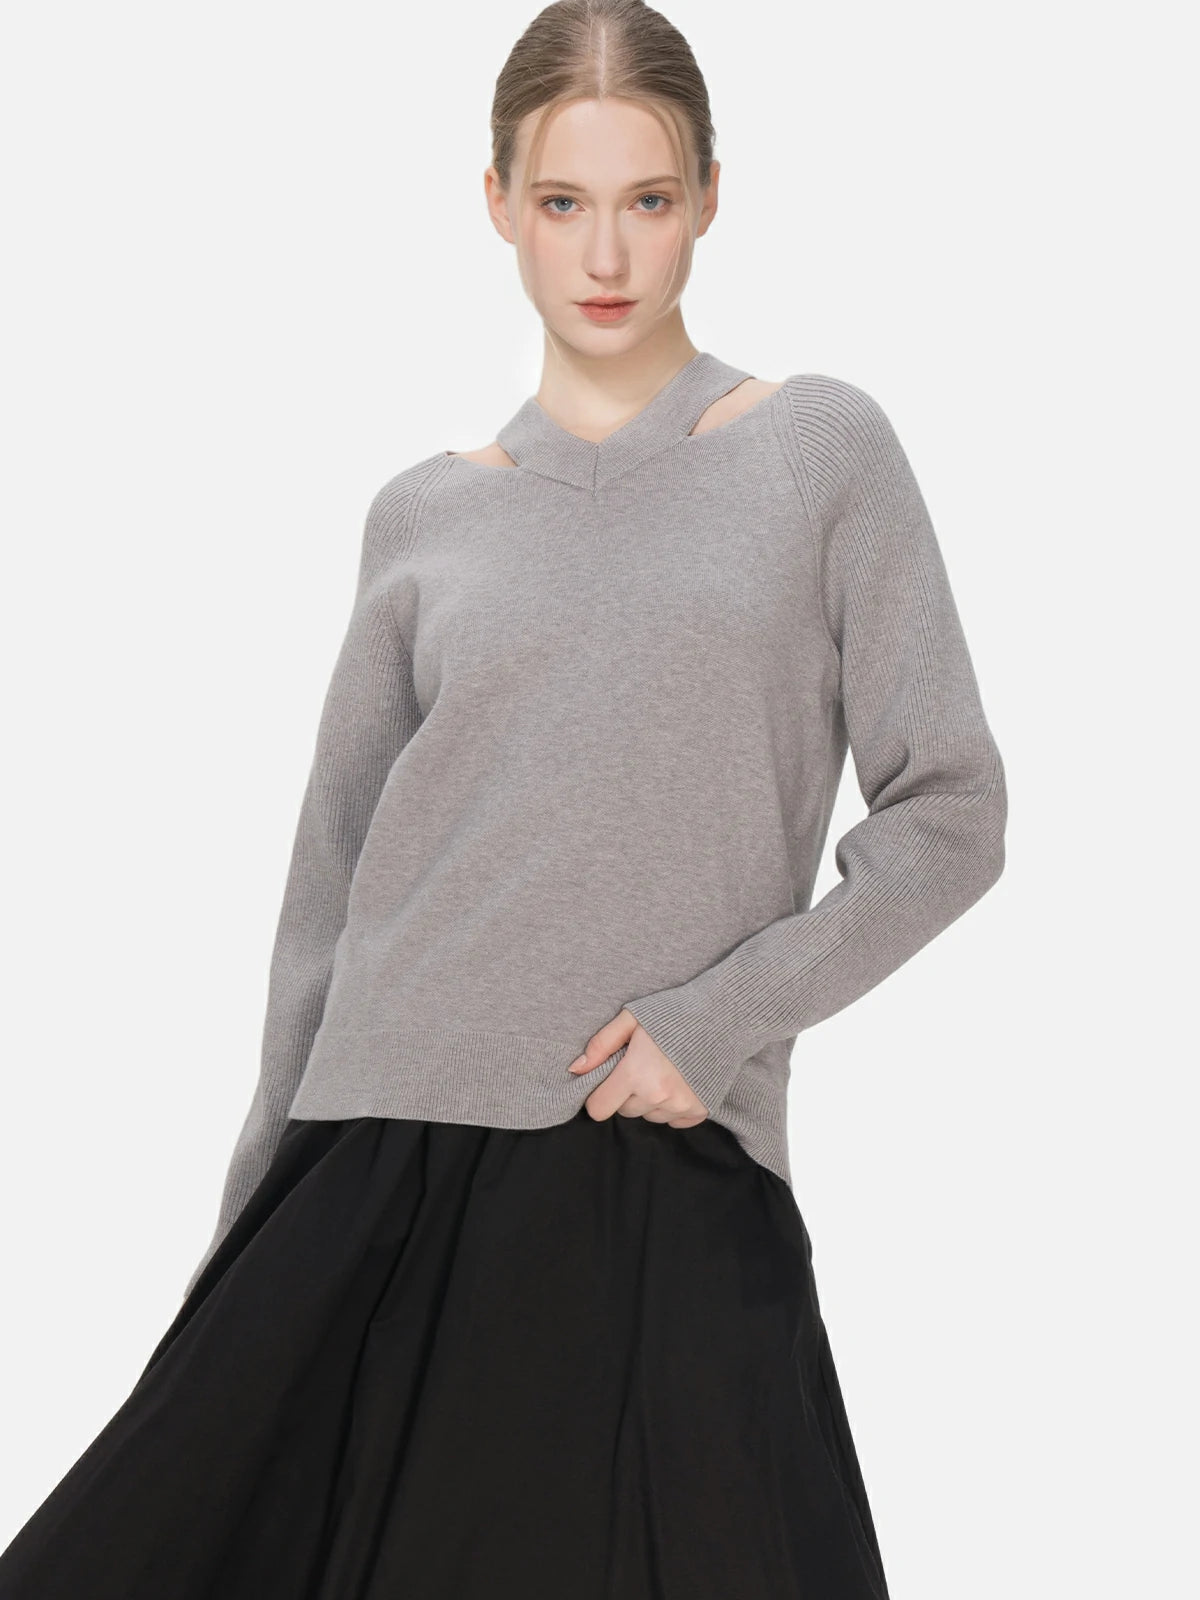 Pullover sweater featuring a forward-thinking and avant-garde aesthetic